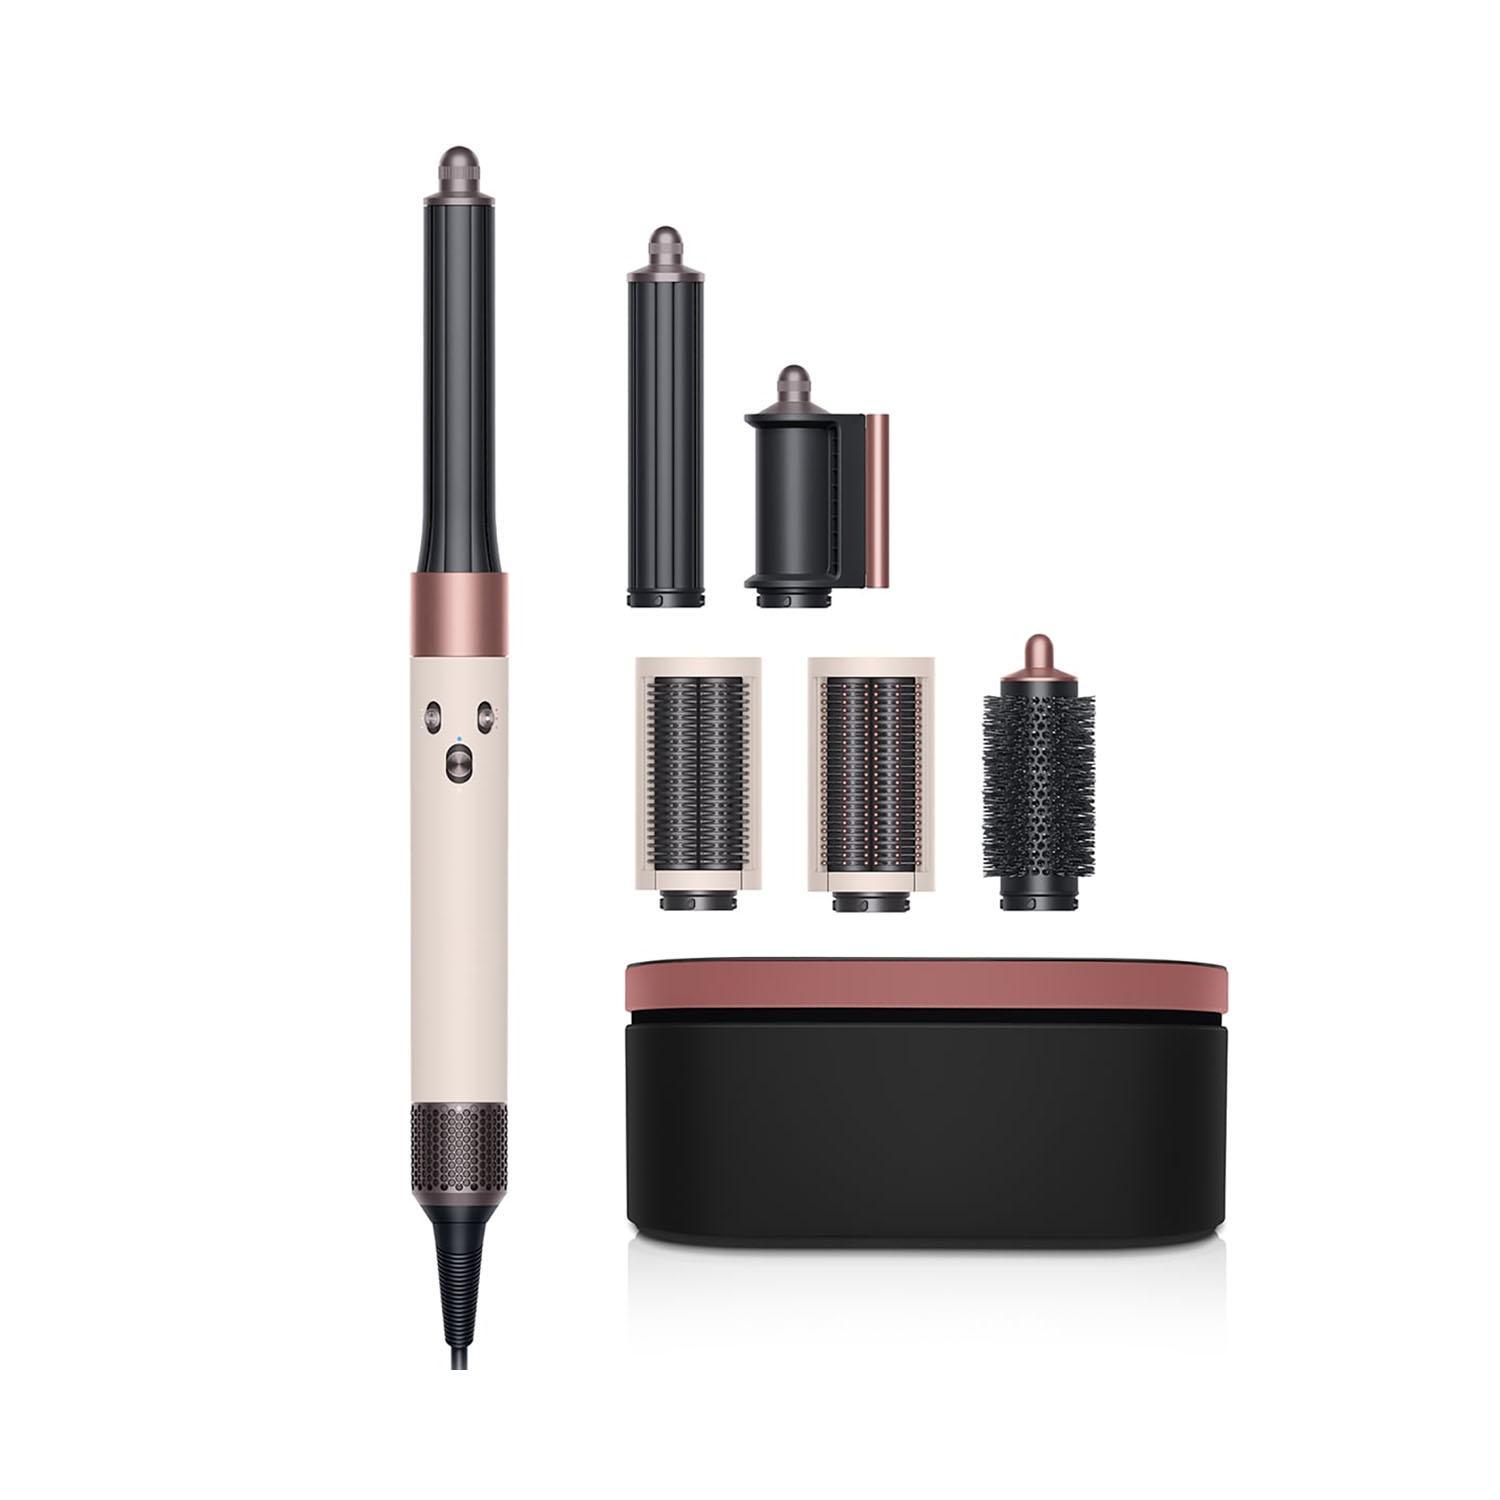 Dyson | Dyson New Limited Edition Airwrap Multi Styler - Ceramic Pink And Rose Gold (1 pc)